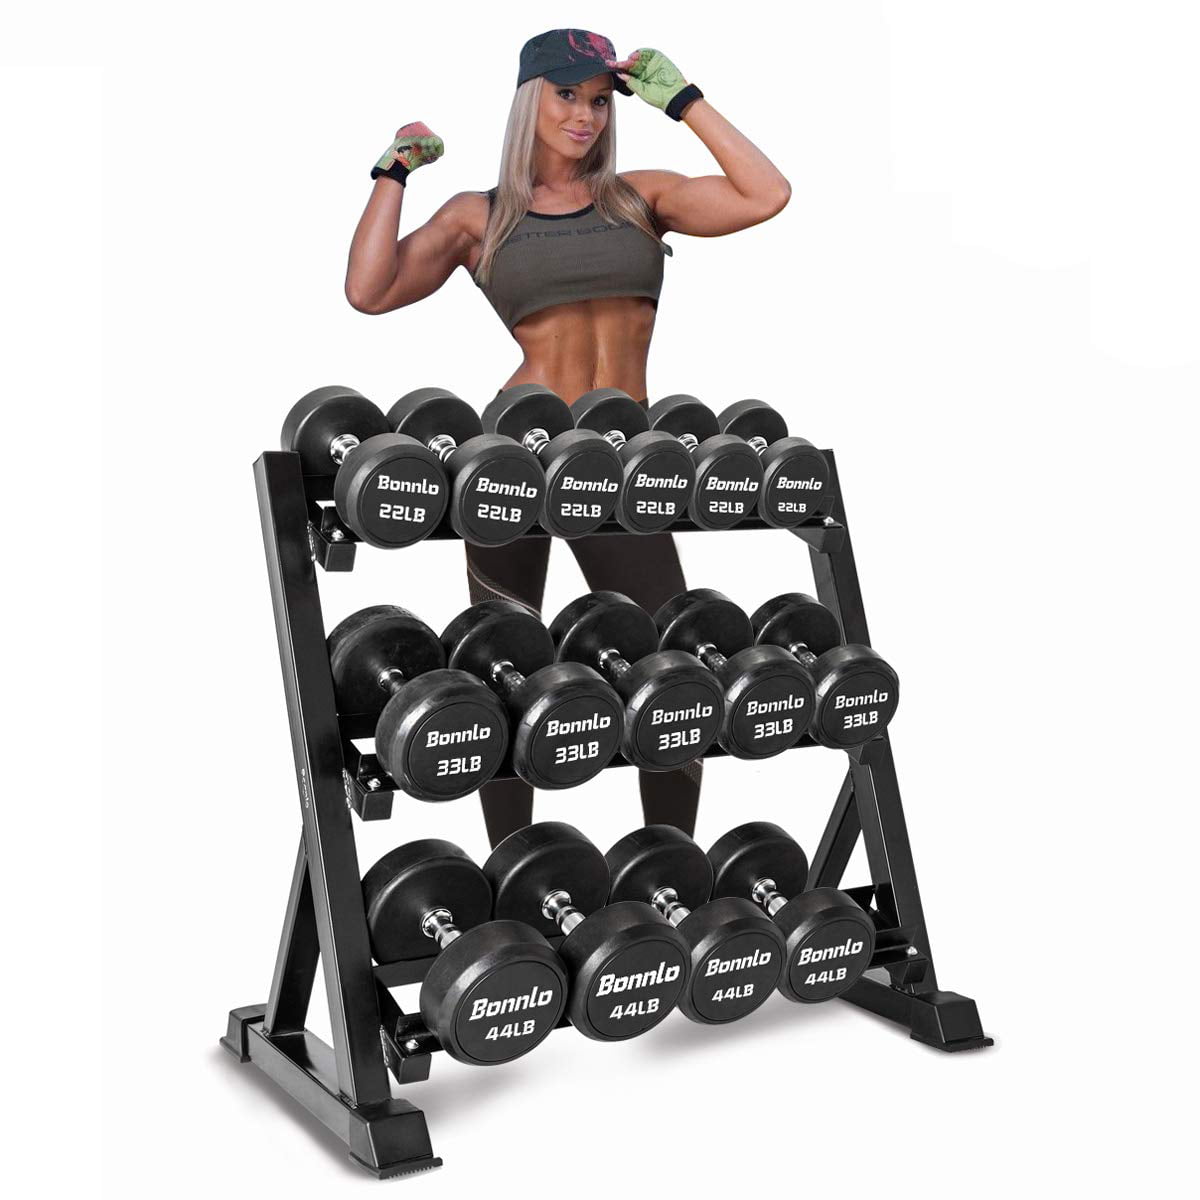 Marcy Compact Dumbbell Rack Free Weight Stand for Home Gym DBR-56 20.50 x 8.50 x 27.00 inches Black 